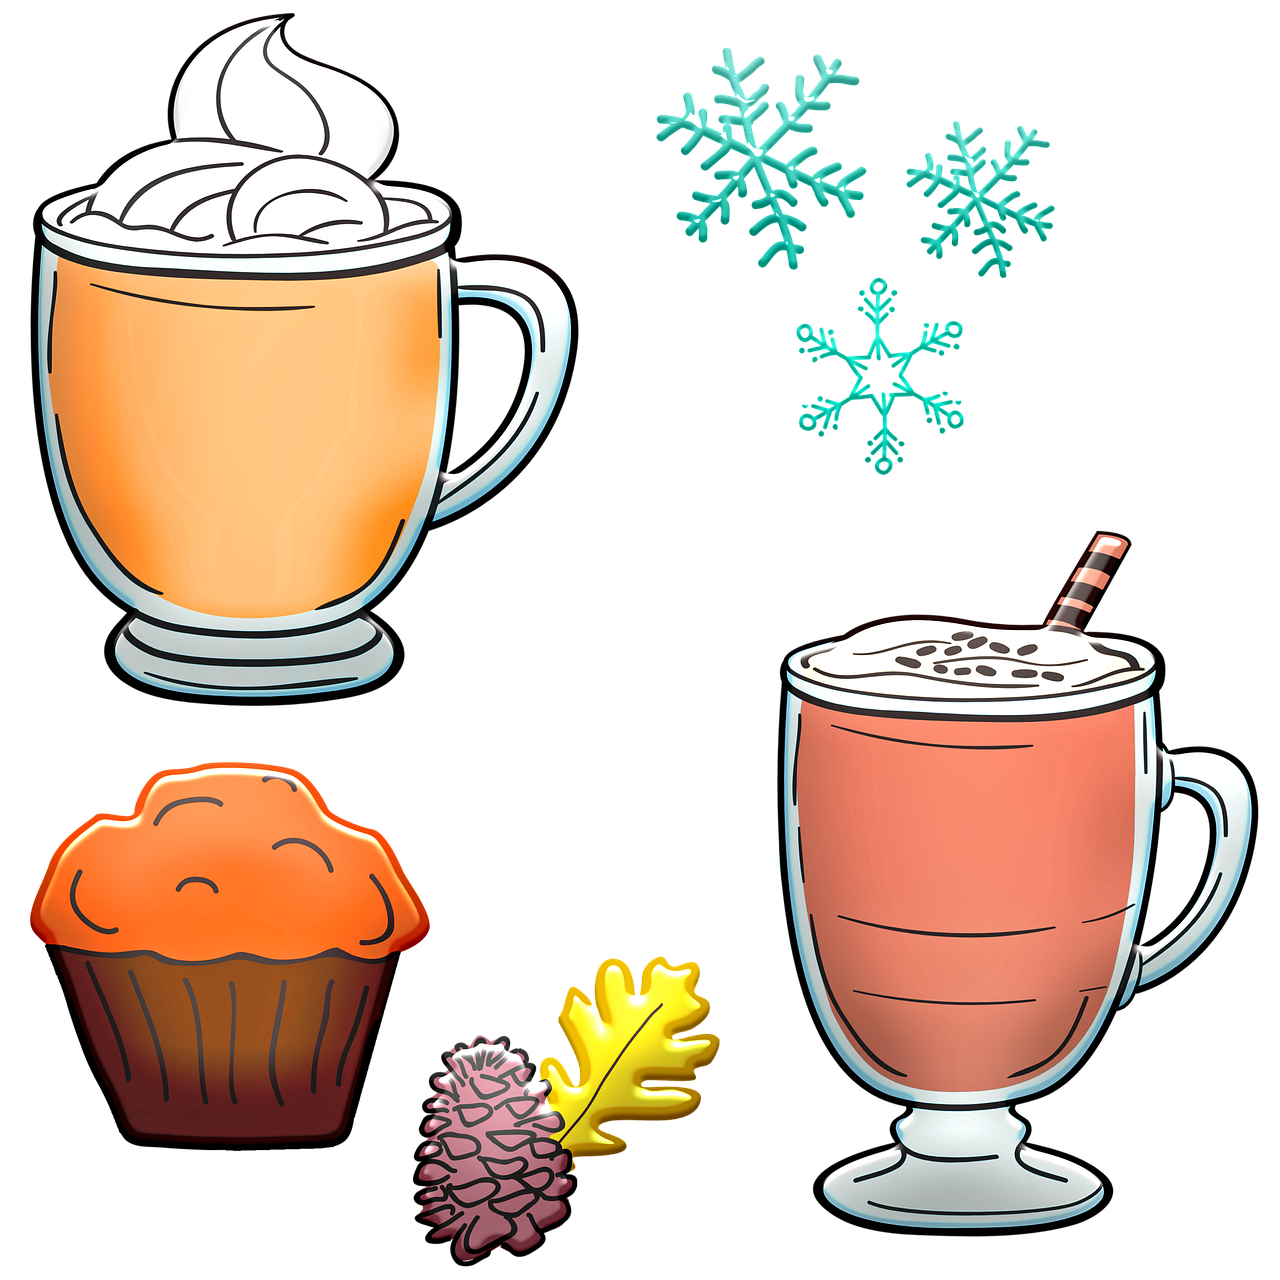 a cup of coffee, a muffin, and snowflakes, a digital rendering, naive art, spritesheet, pumpkin, high contrast illustration, drink milkshakes together